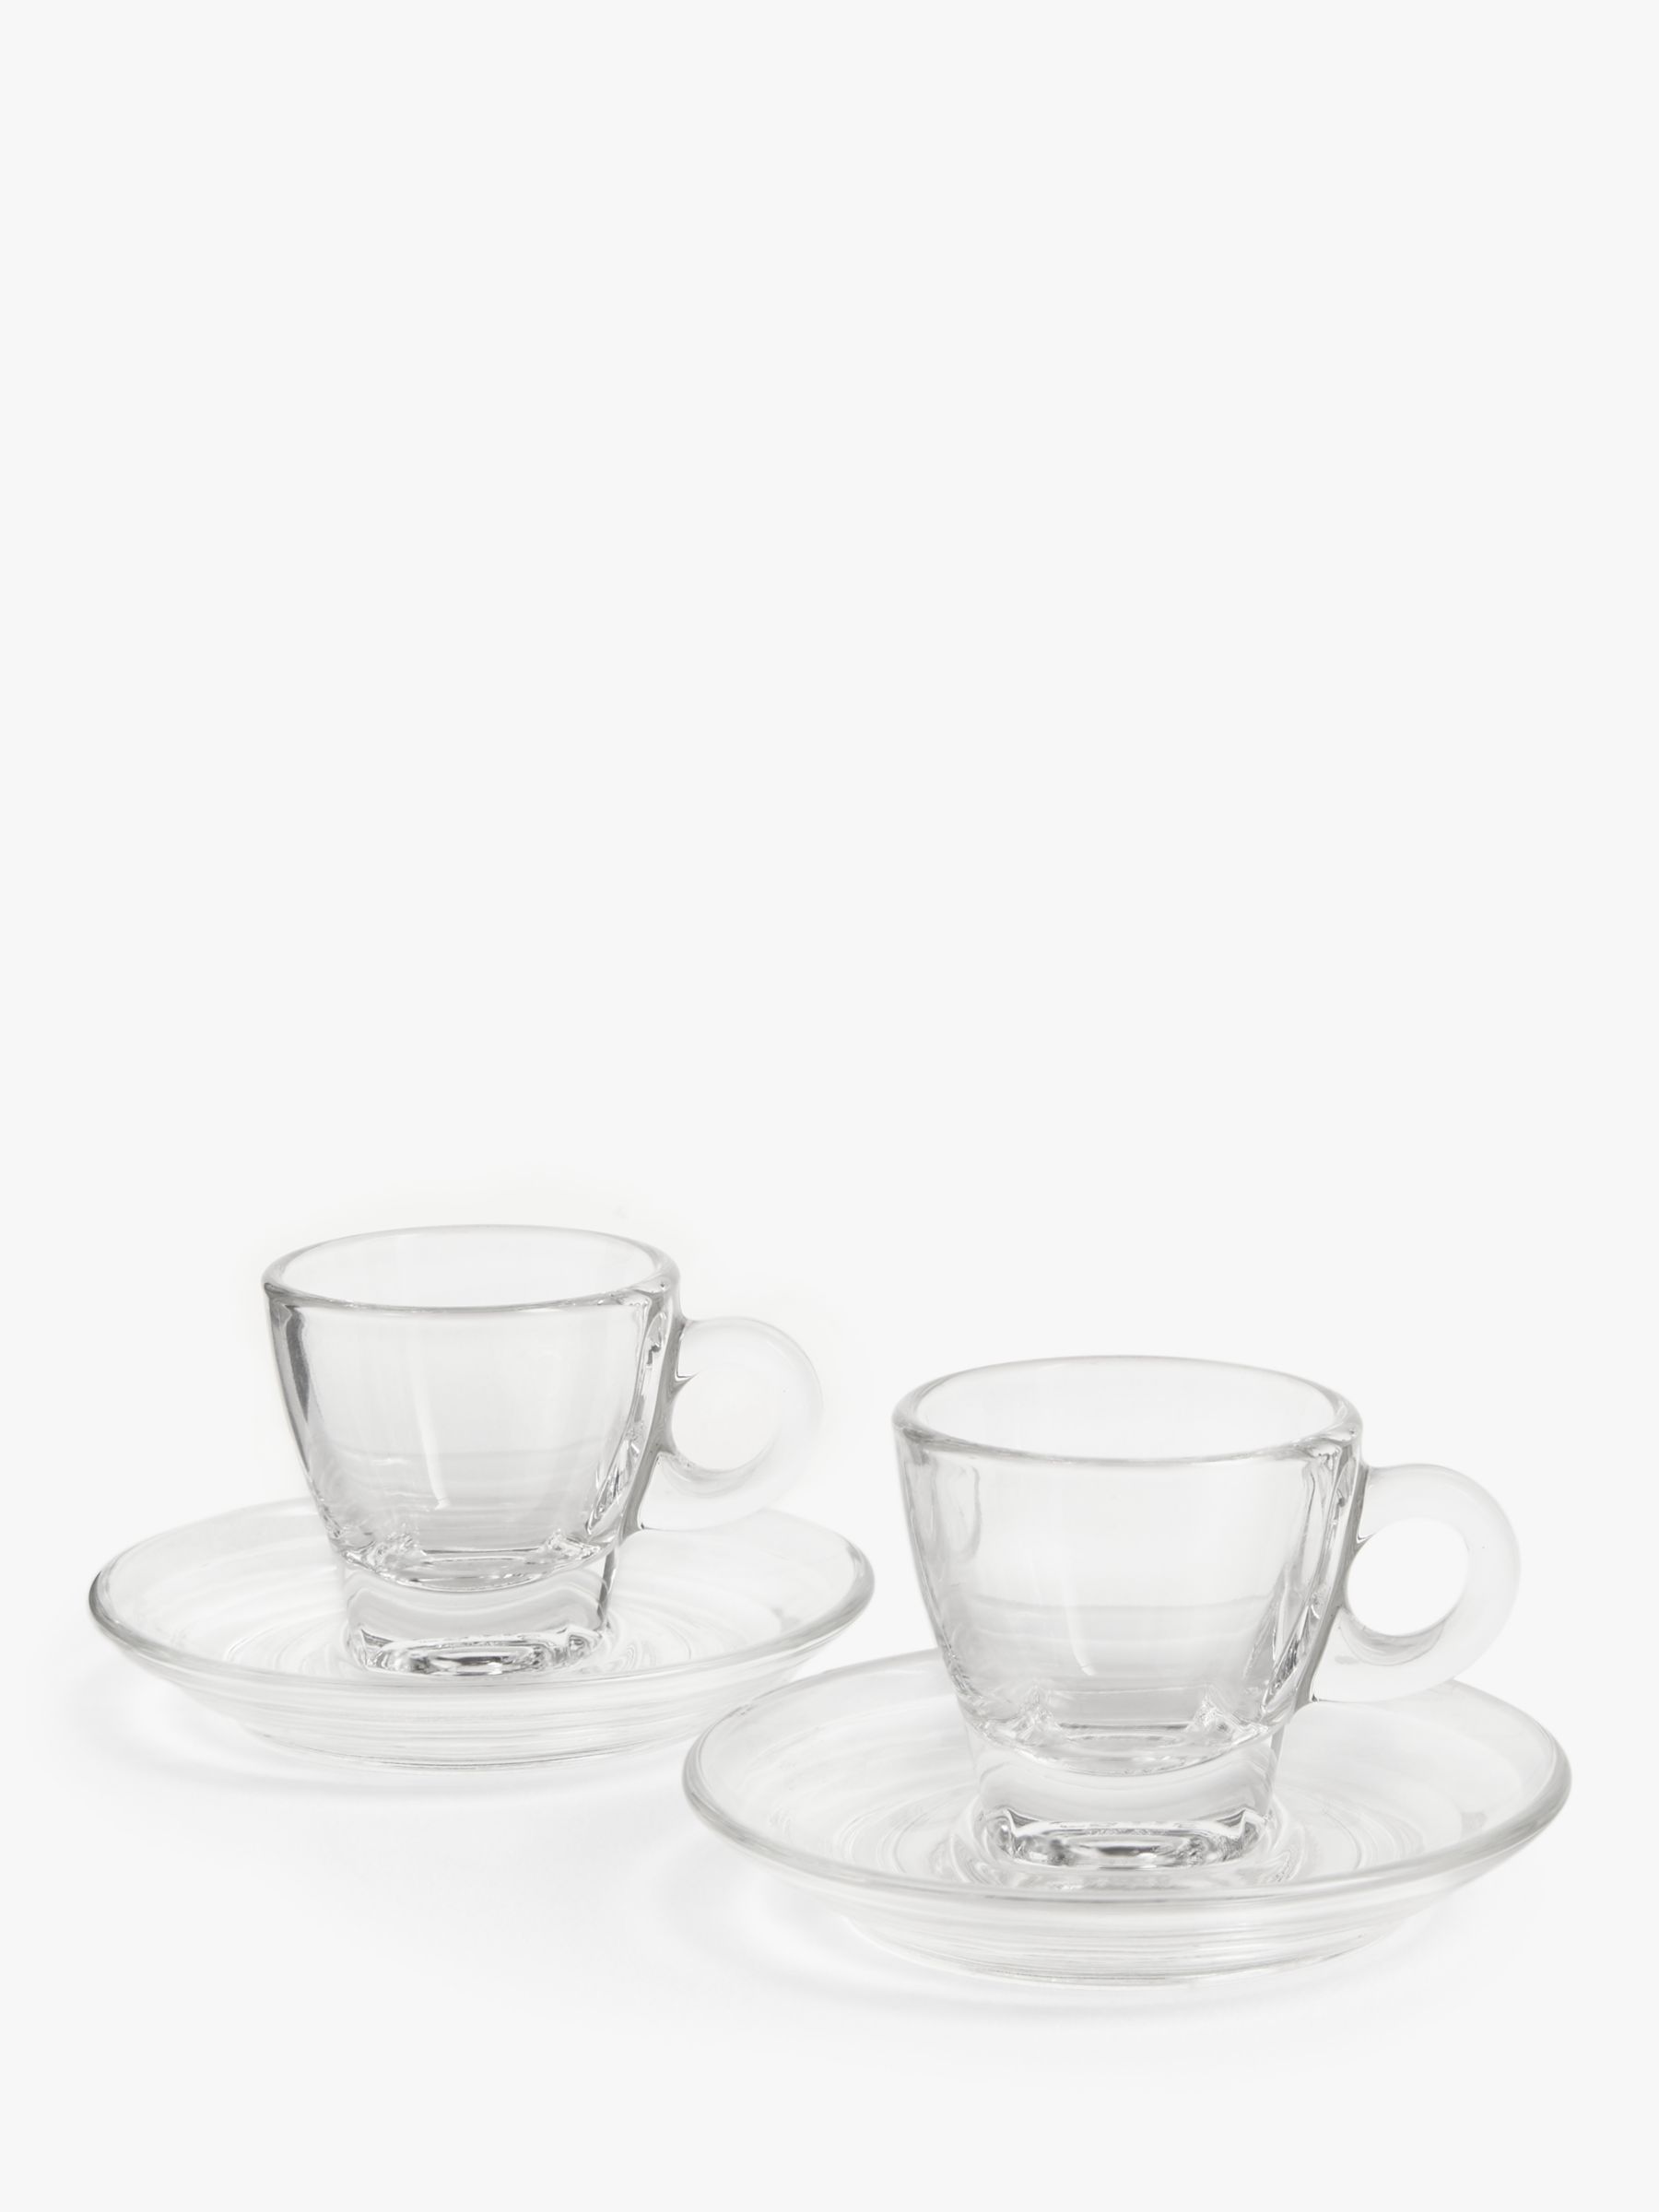 Fake Espresso in Glass Cup & Saucer